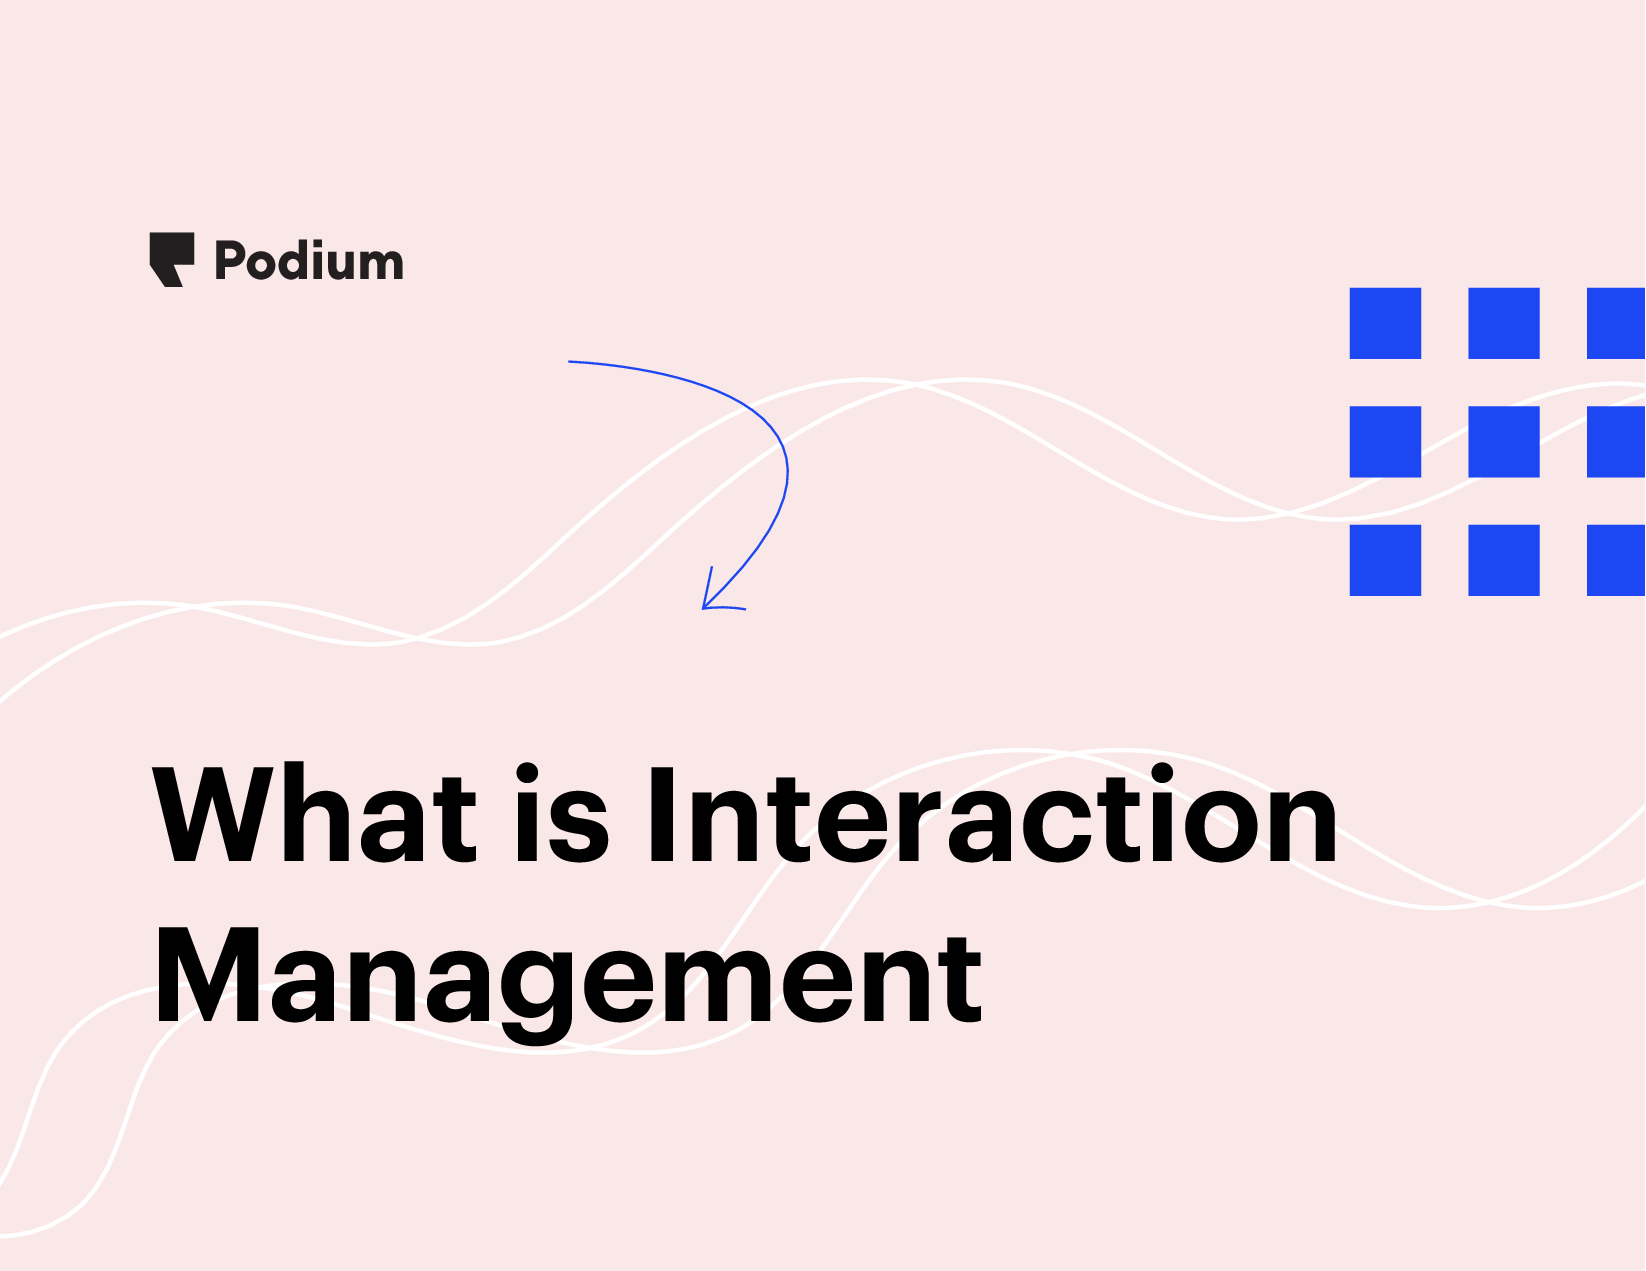 What is Interaction Management?